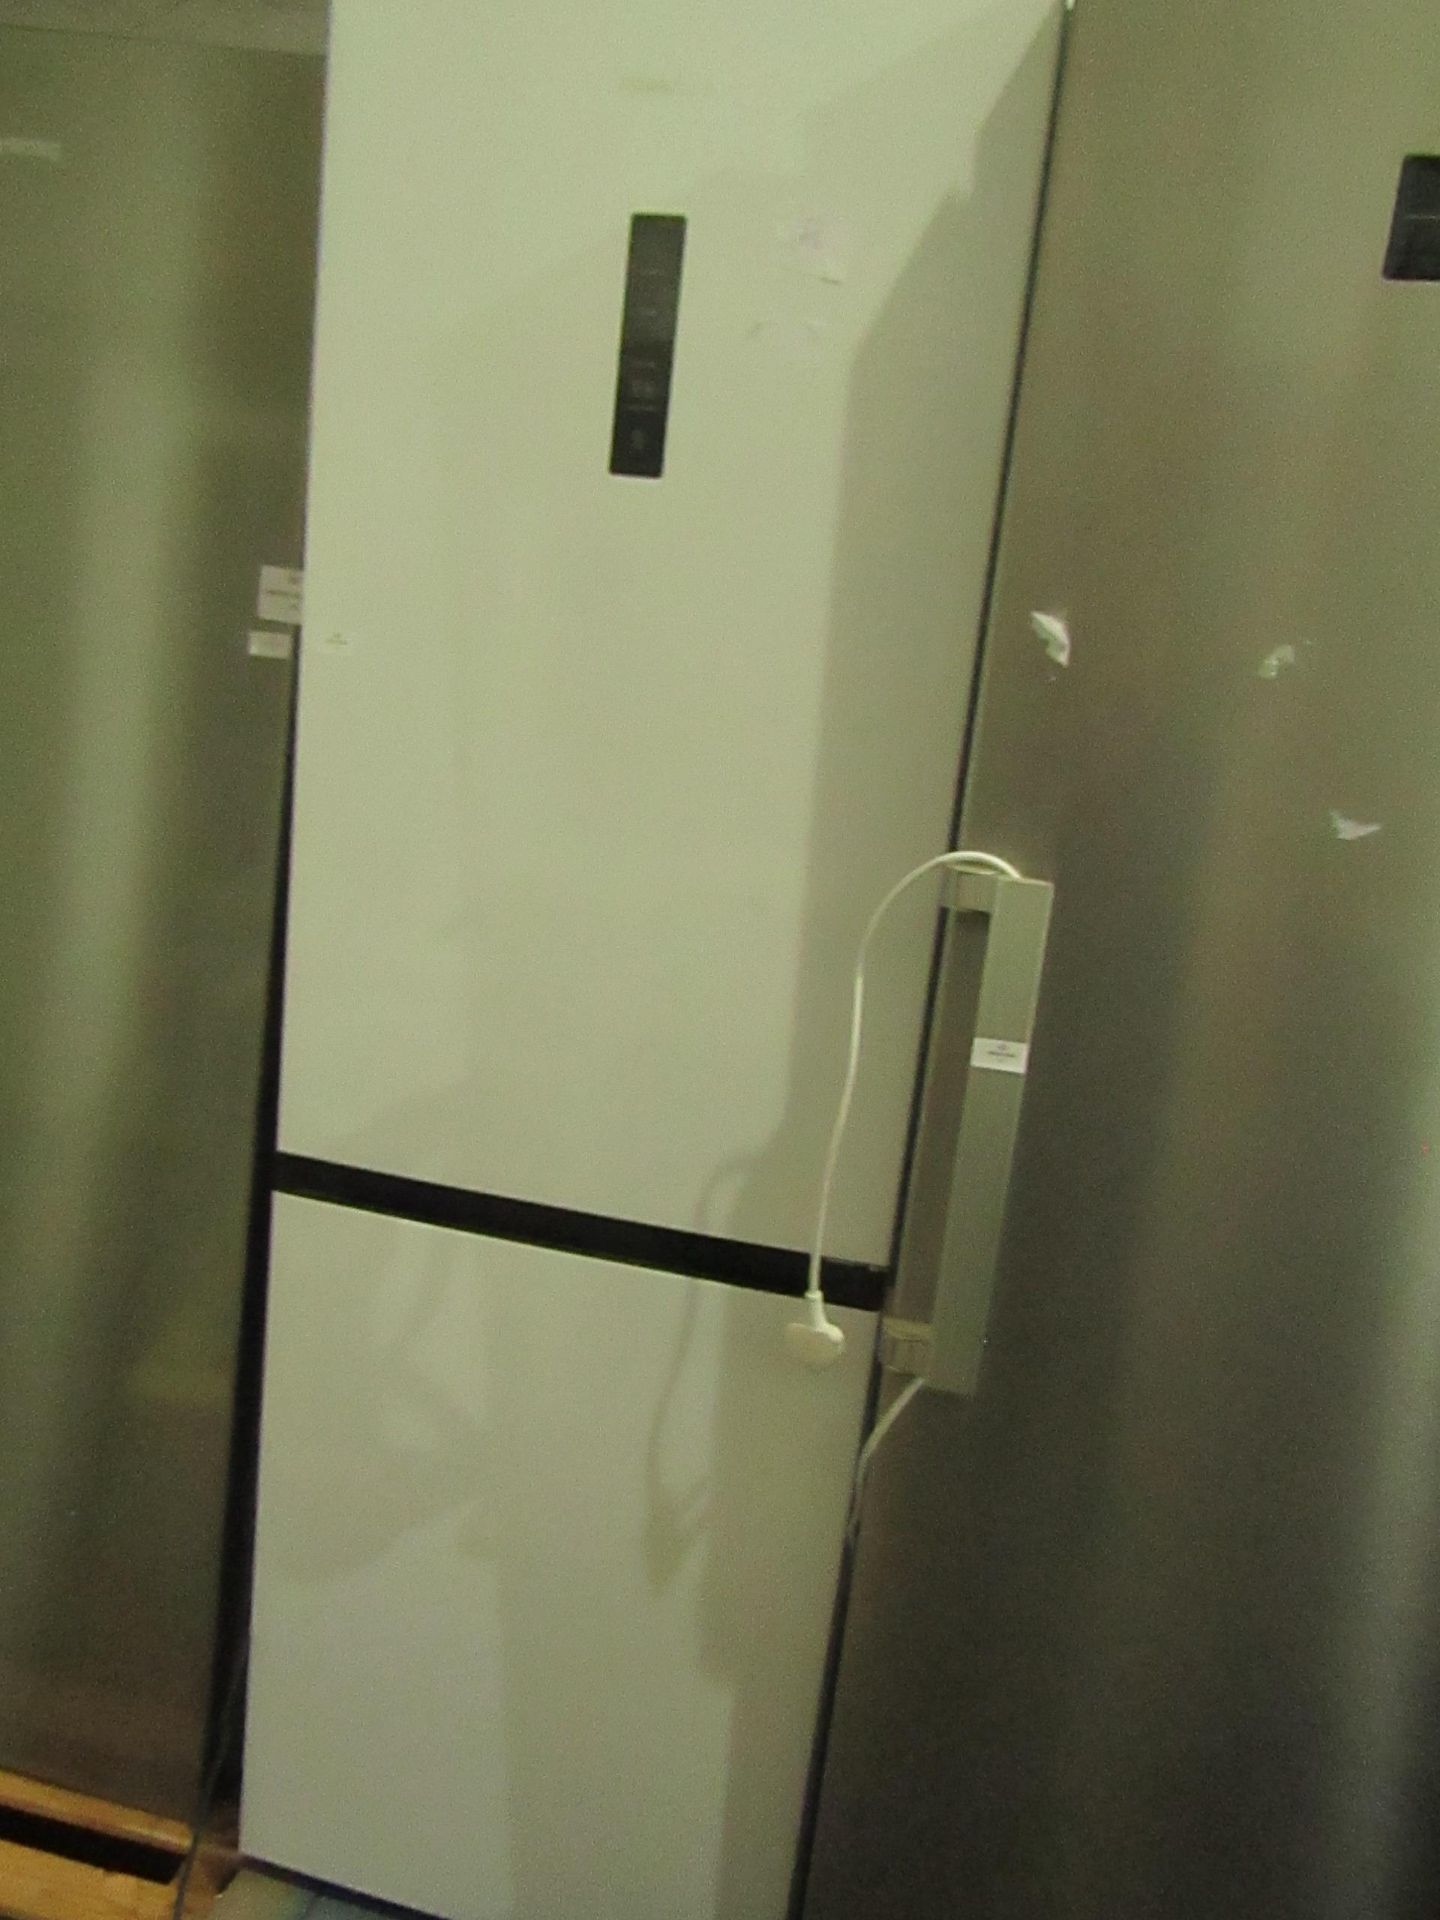 Hisense 60/40 fridge freezer, tested working for coldness in both fridge and freezer and it is in